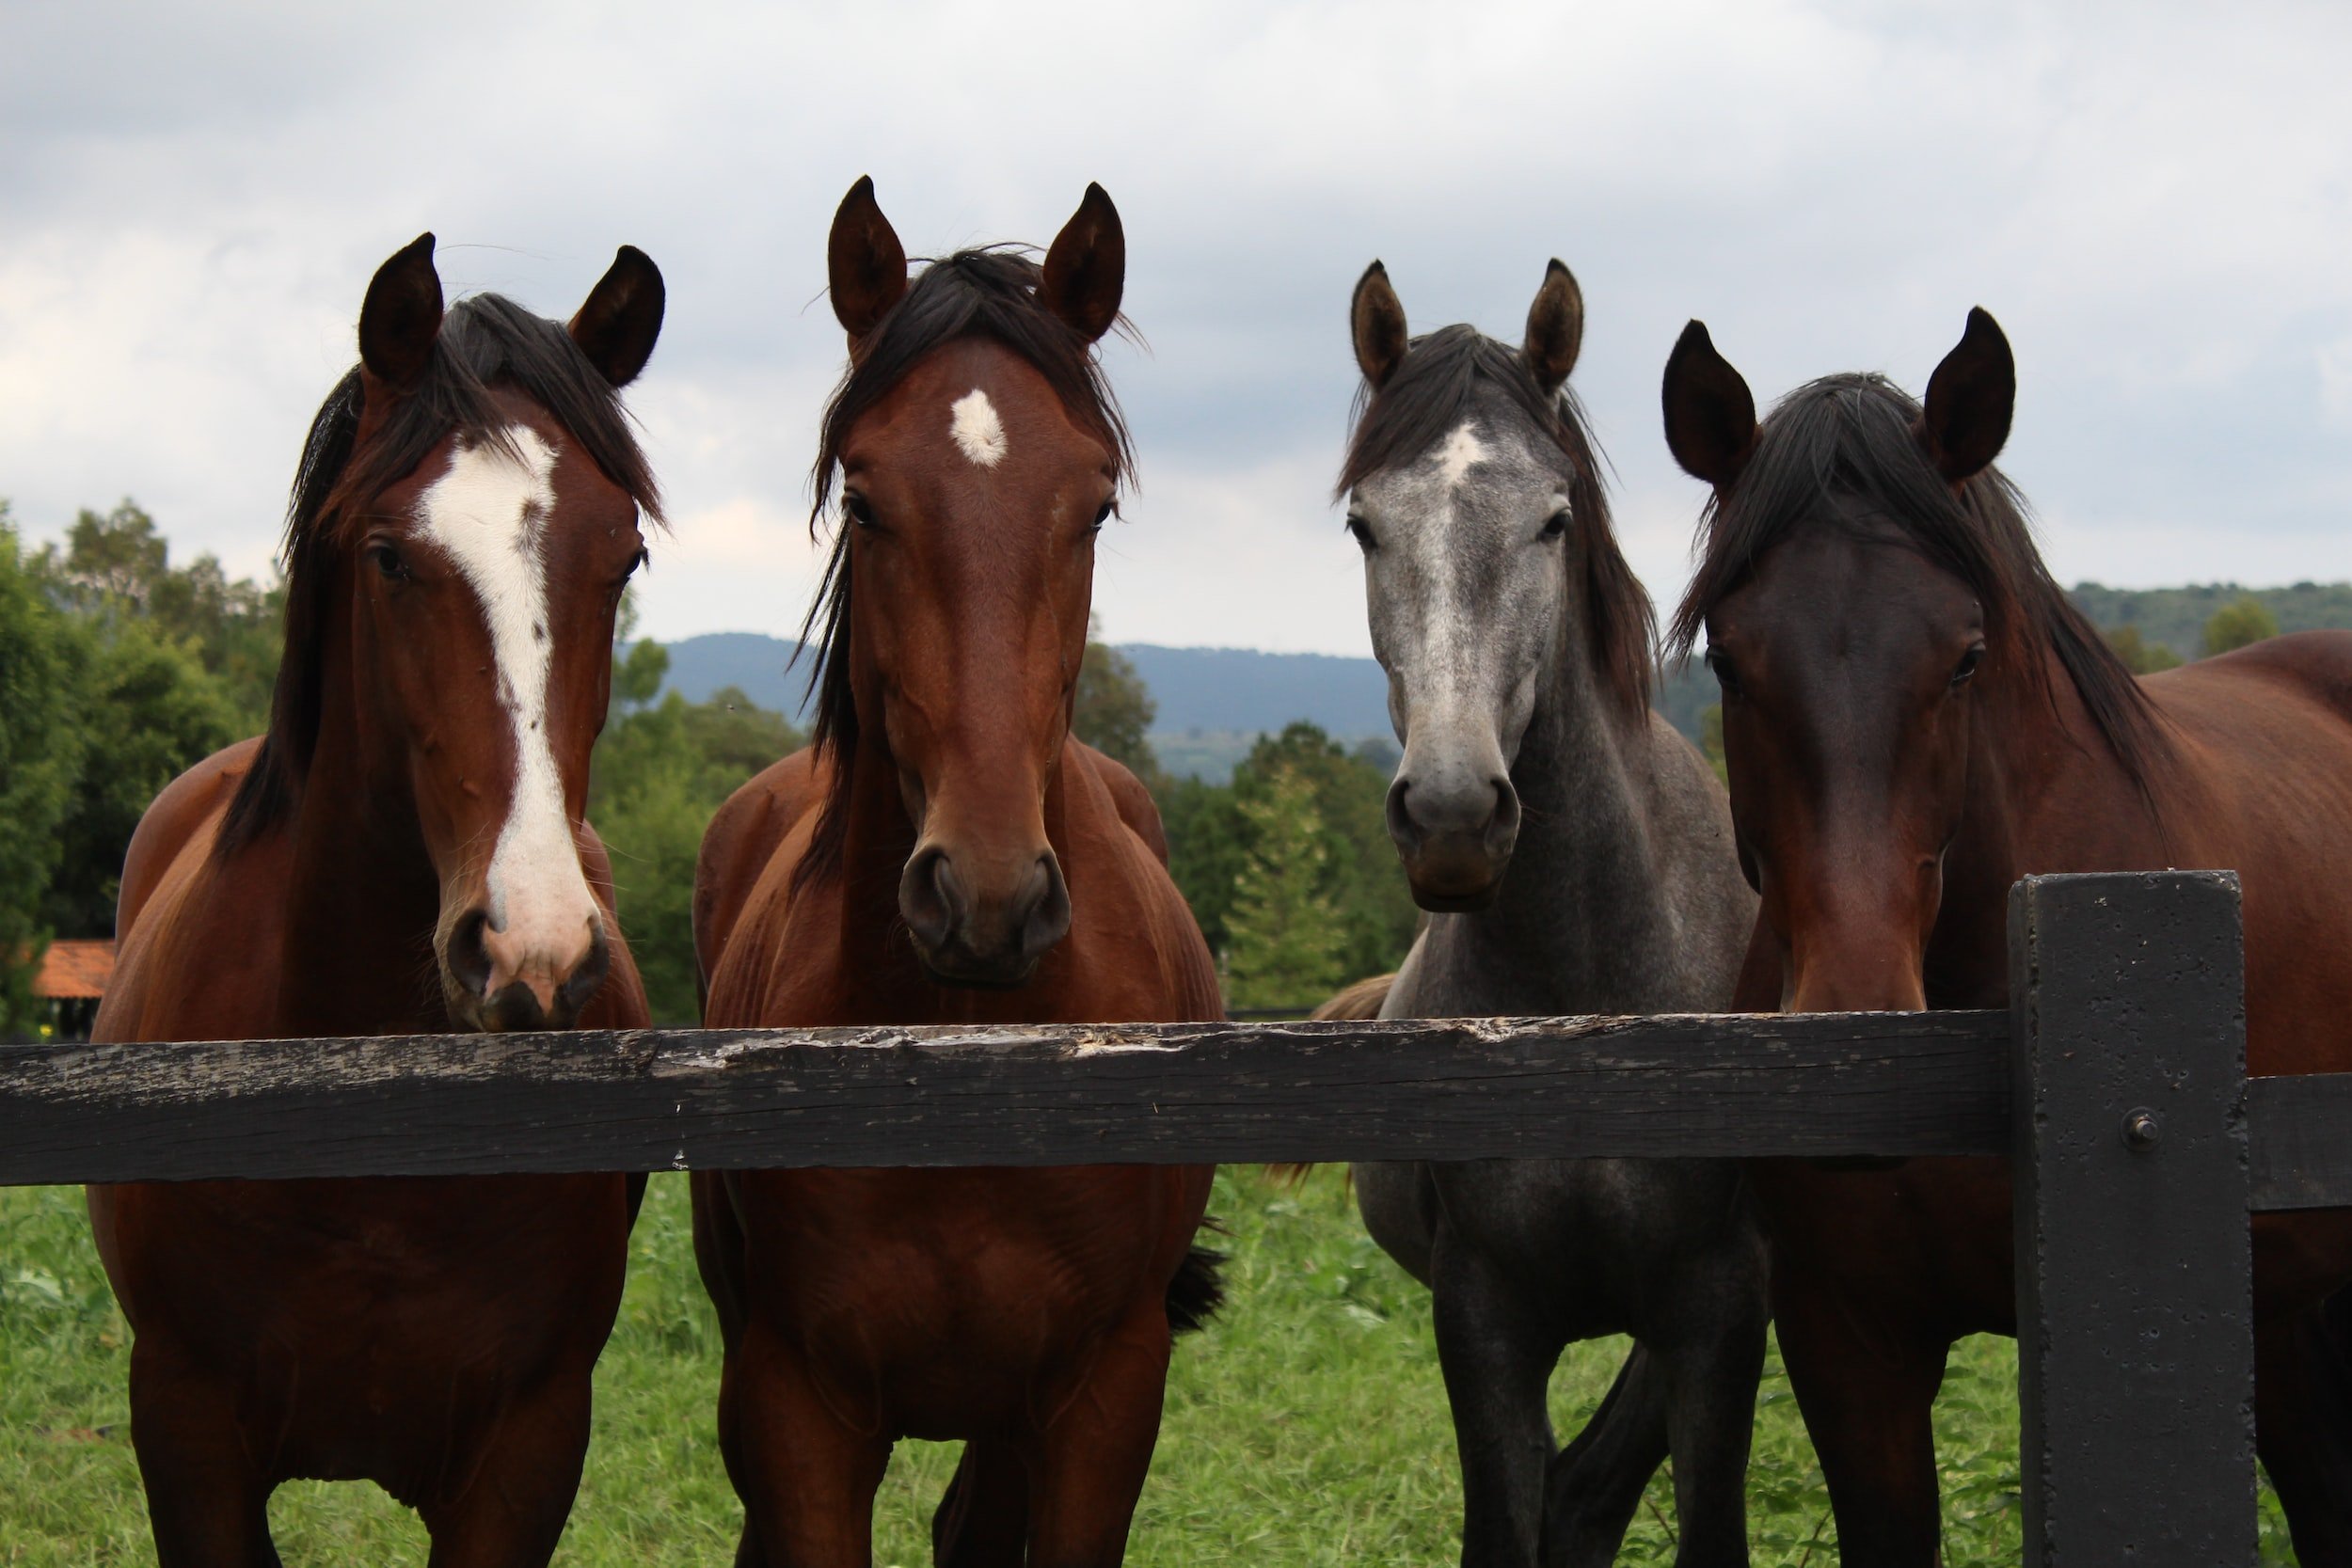 A group of horses standing behind a fence